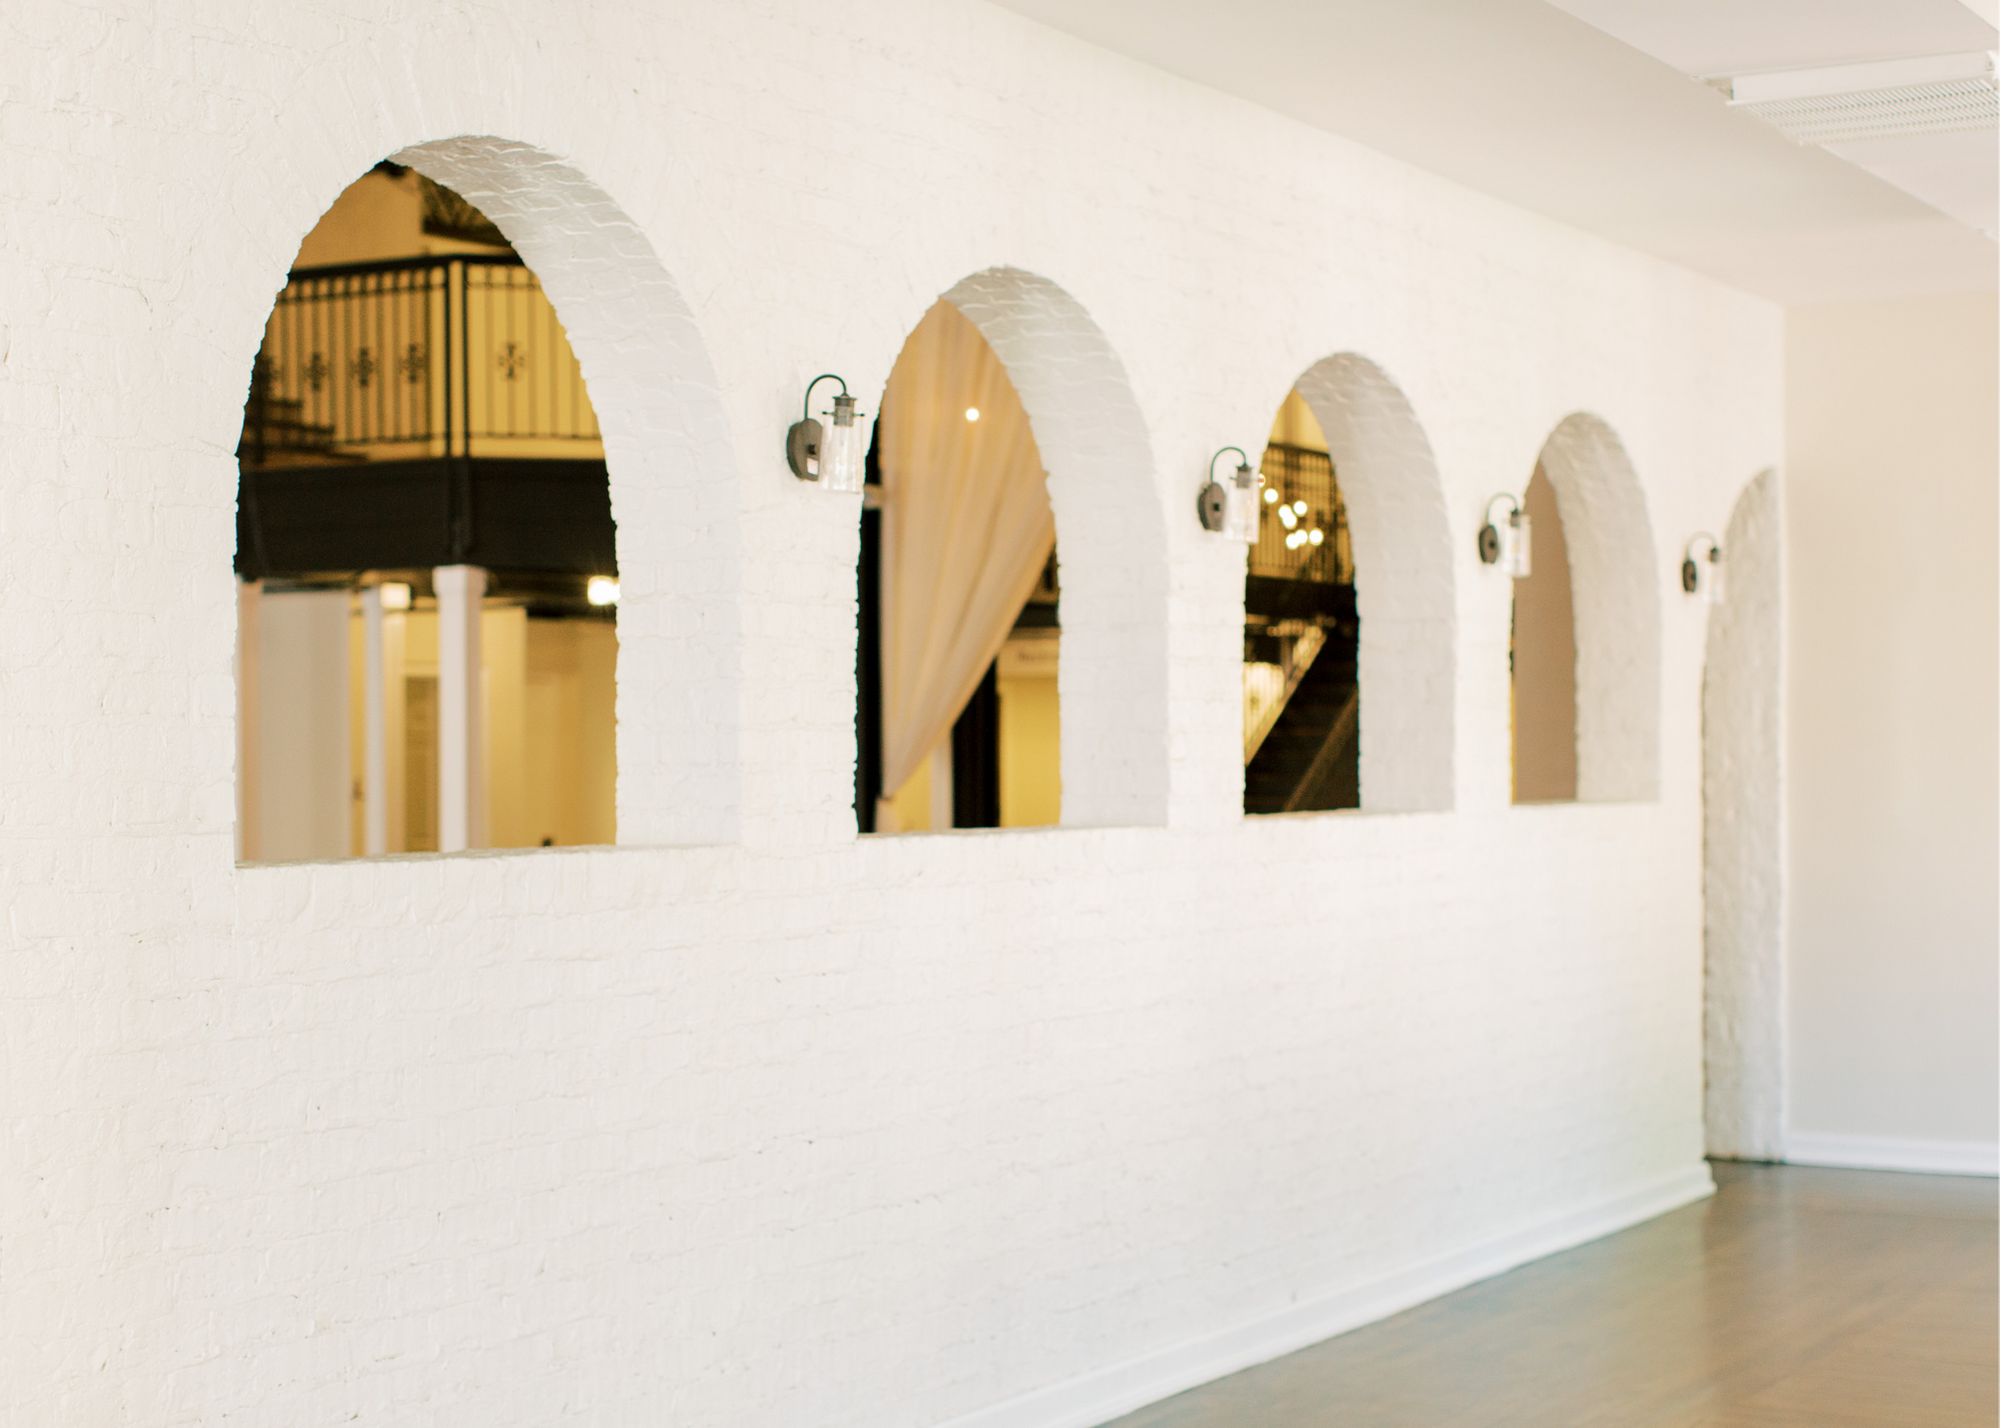 Our event space offers a crisp, clean background for your unique event. With white original-brick walls, endless floorpan options, custom lighting packages, and tables and chairs… we’ve got it all!